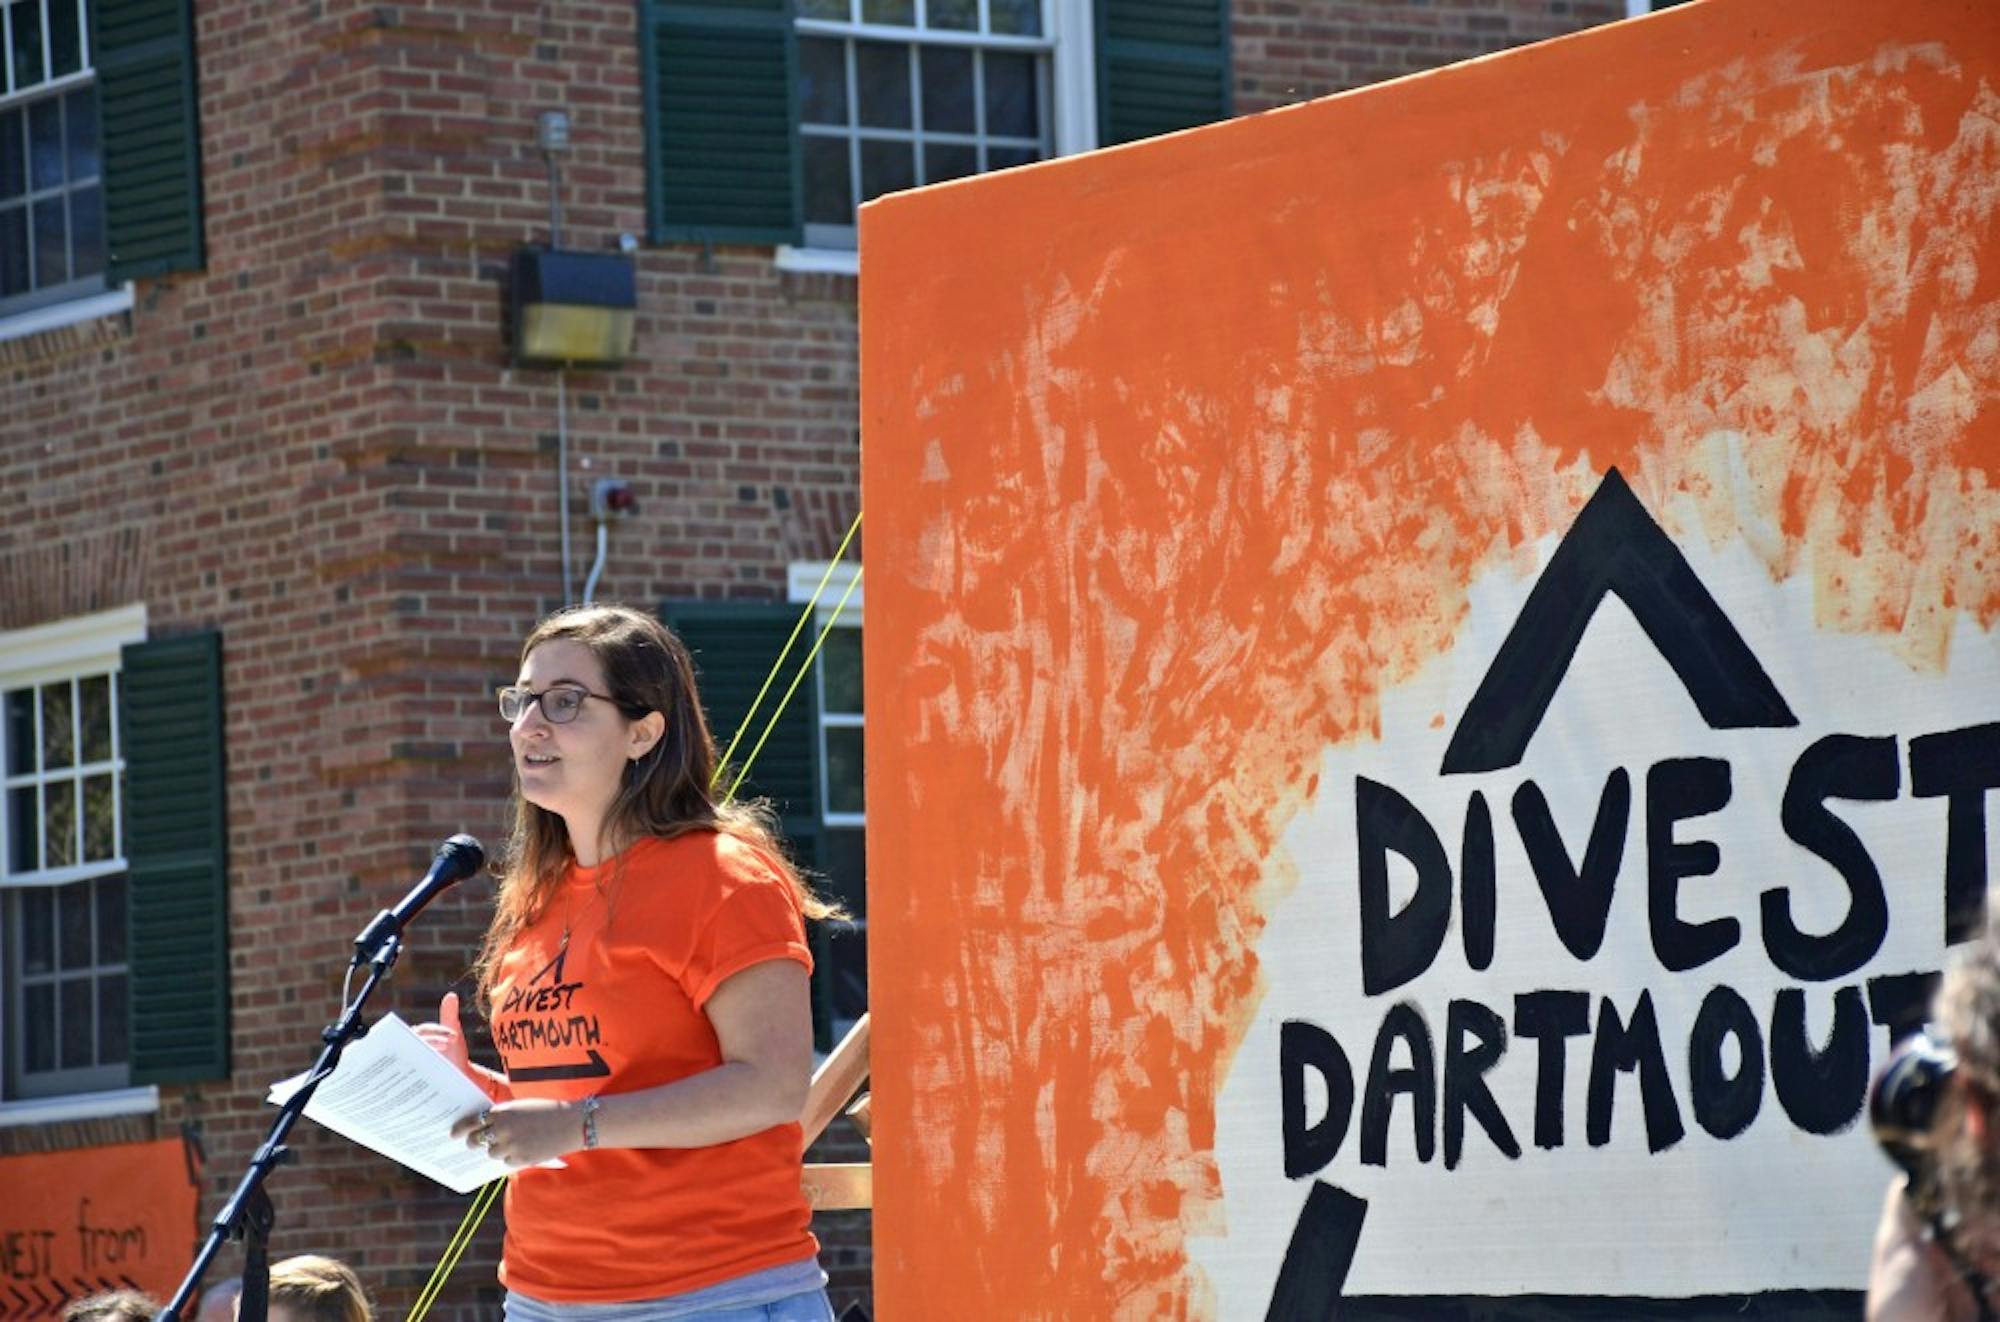 Divest Dartmouth's Big Green Rally was the most co-sponsored event in College history.